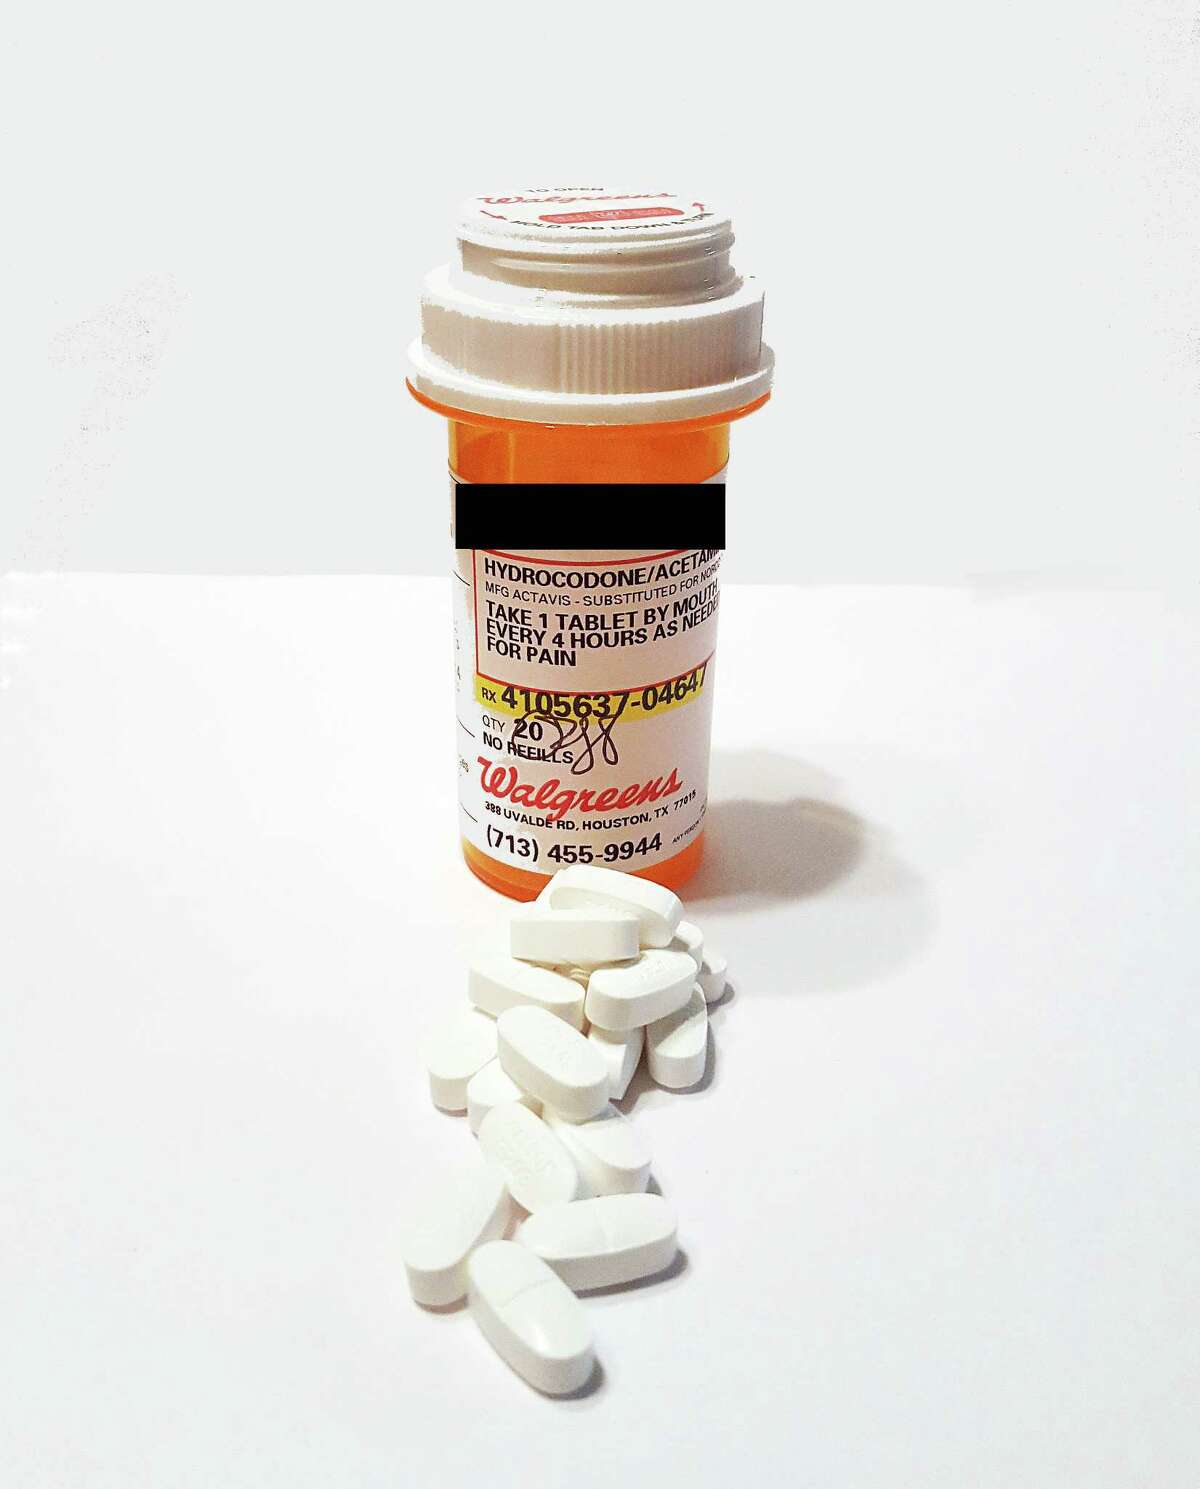 The common drug hydrocodone is one of many opioids at the center of a lawsuit against manufacturers by Liberty County.